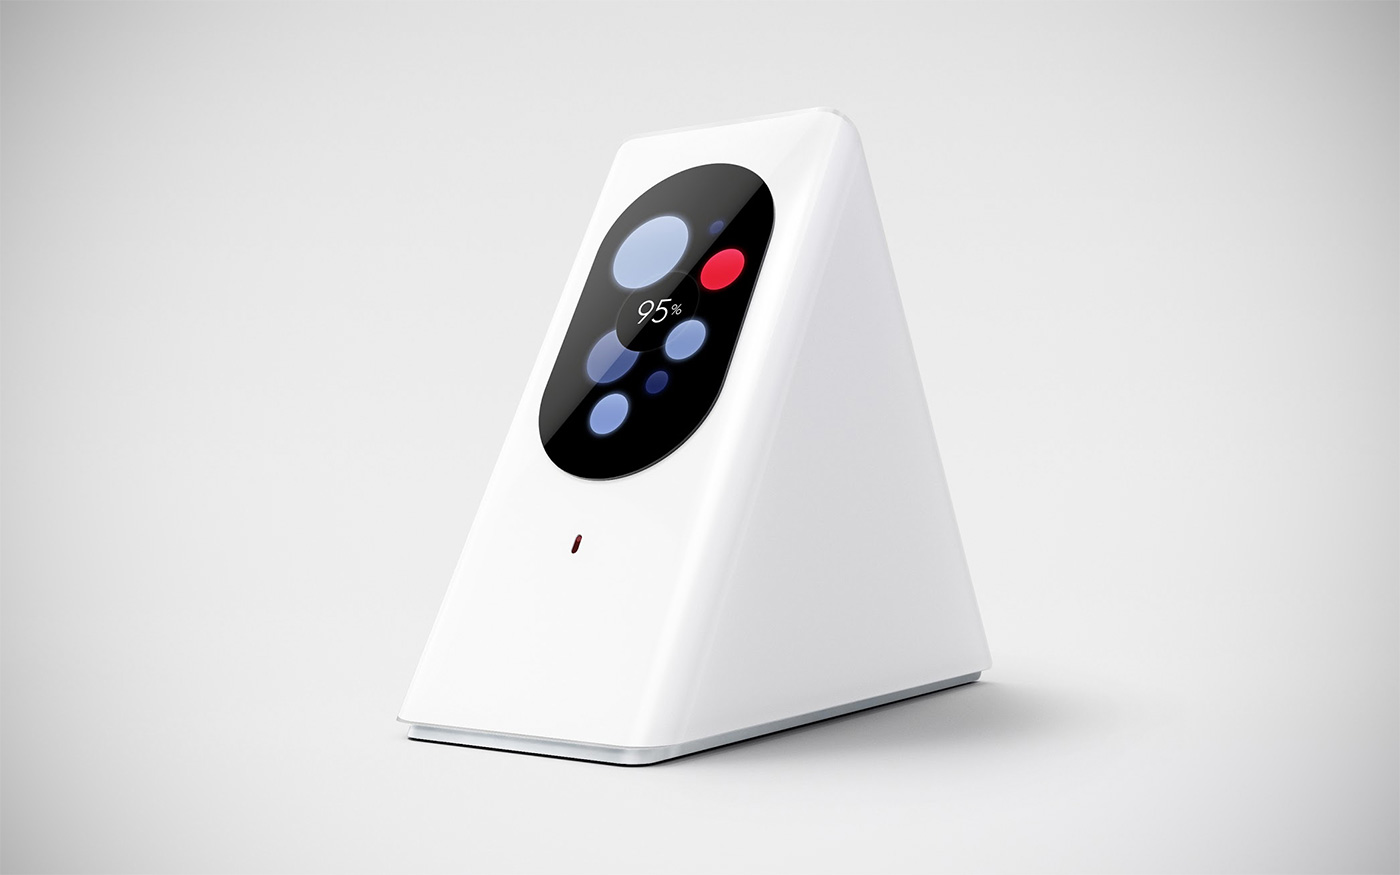 Starry&#039;s Station aims to be the smartest, prettiest WiFi router around